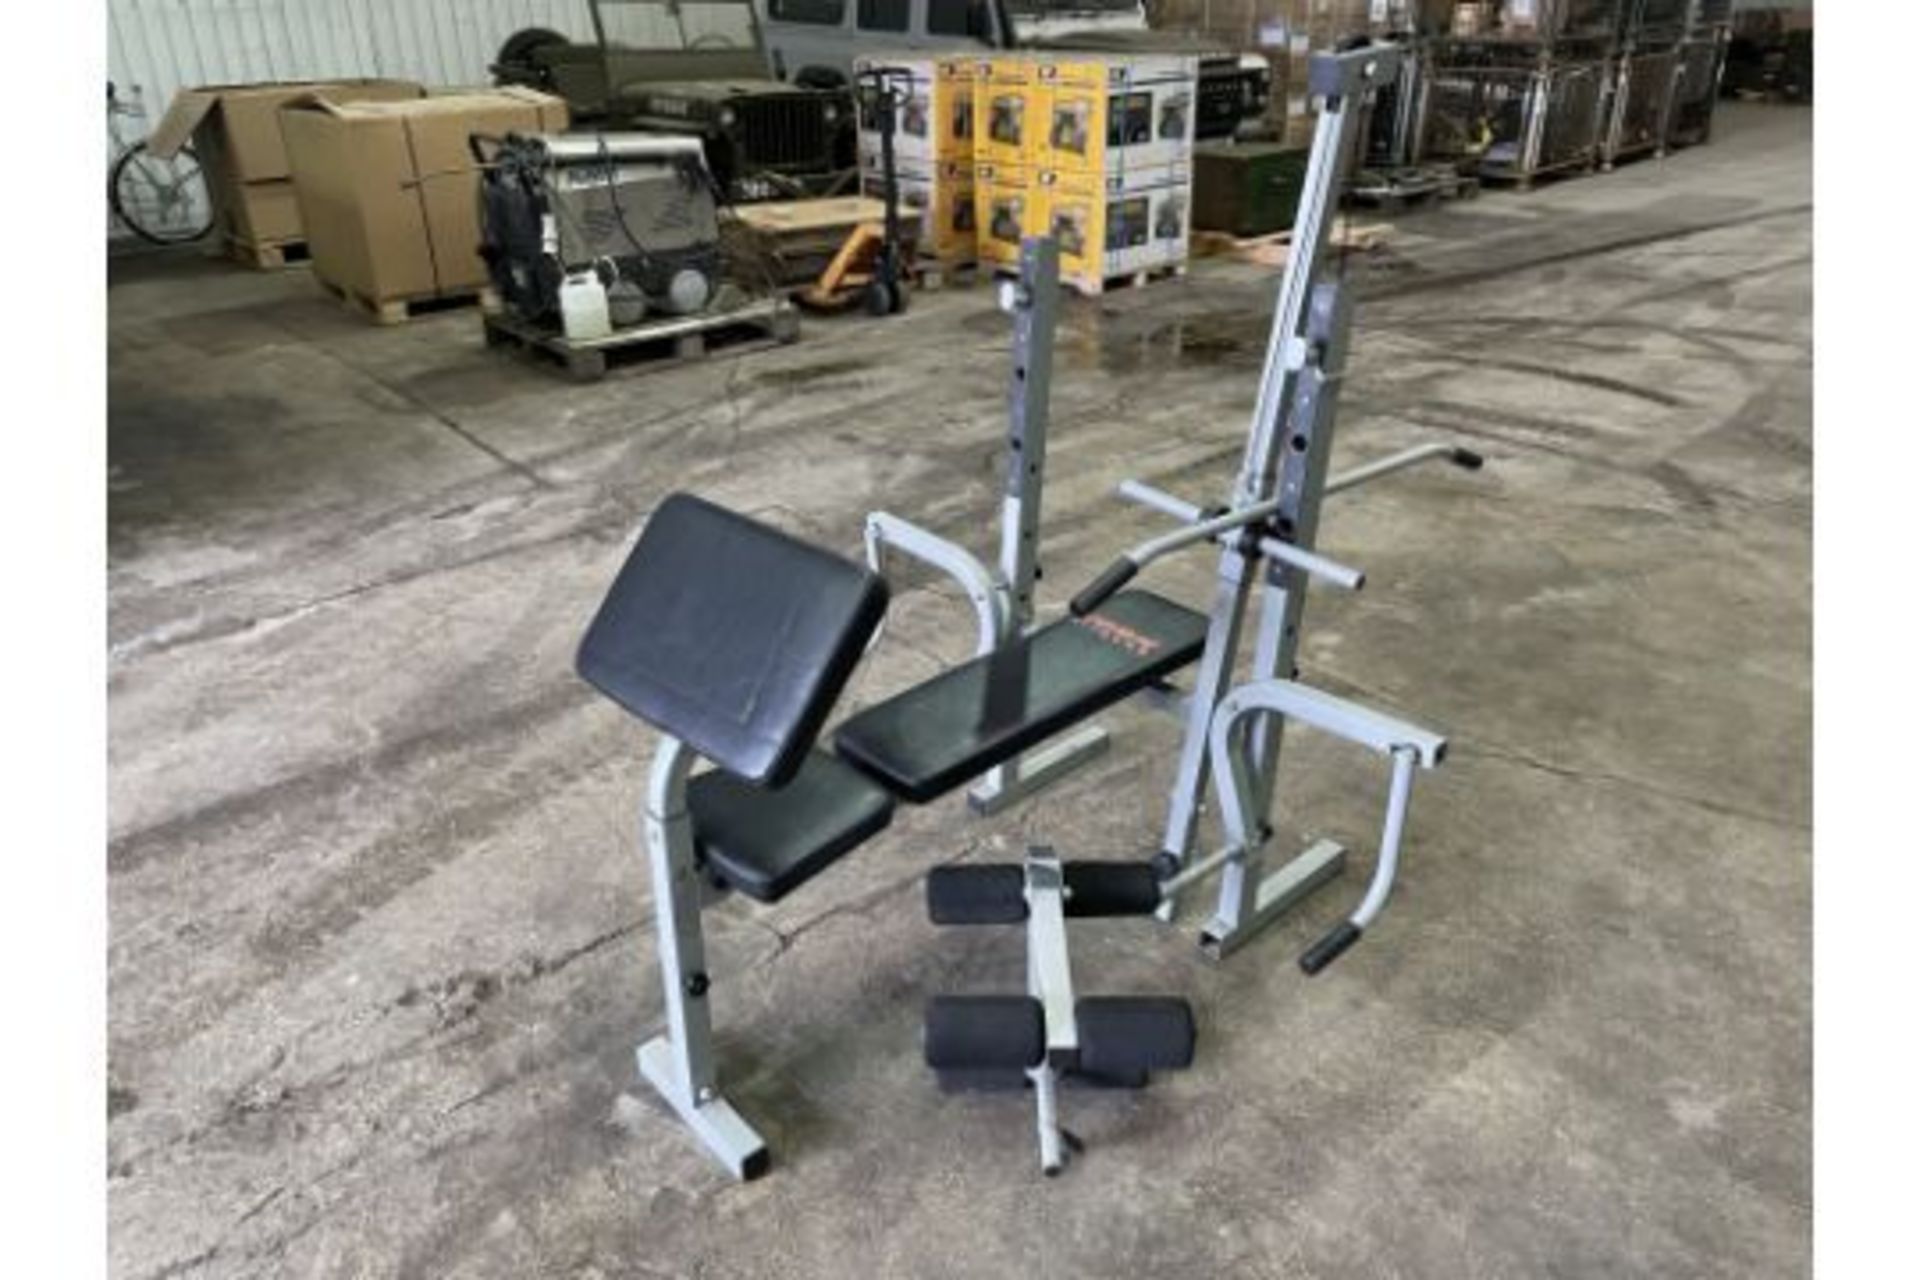 York Fitness Heavy Duty Multi-function Barbell Bench - Image 11 of 12